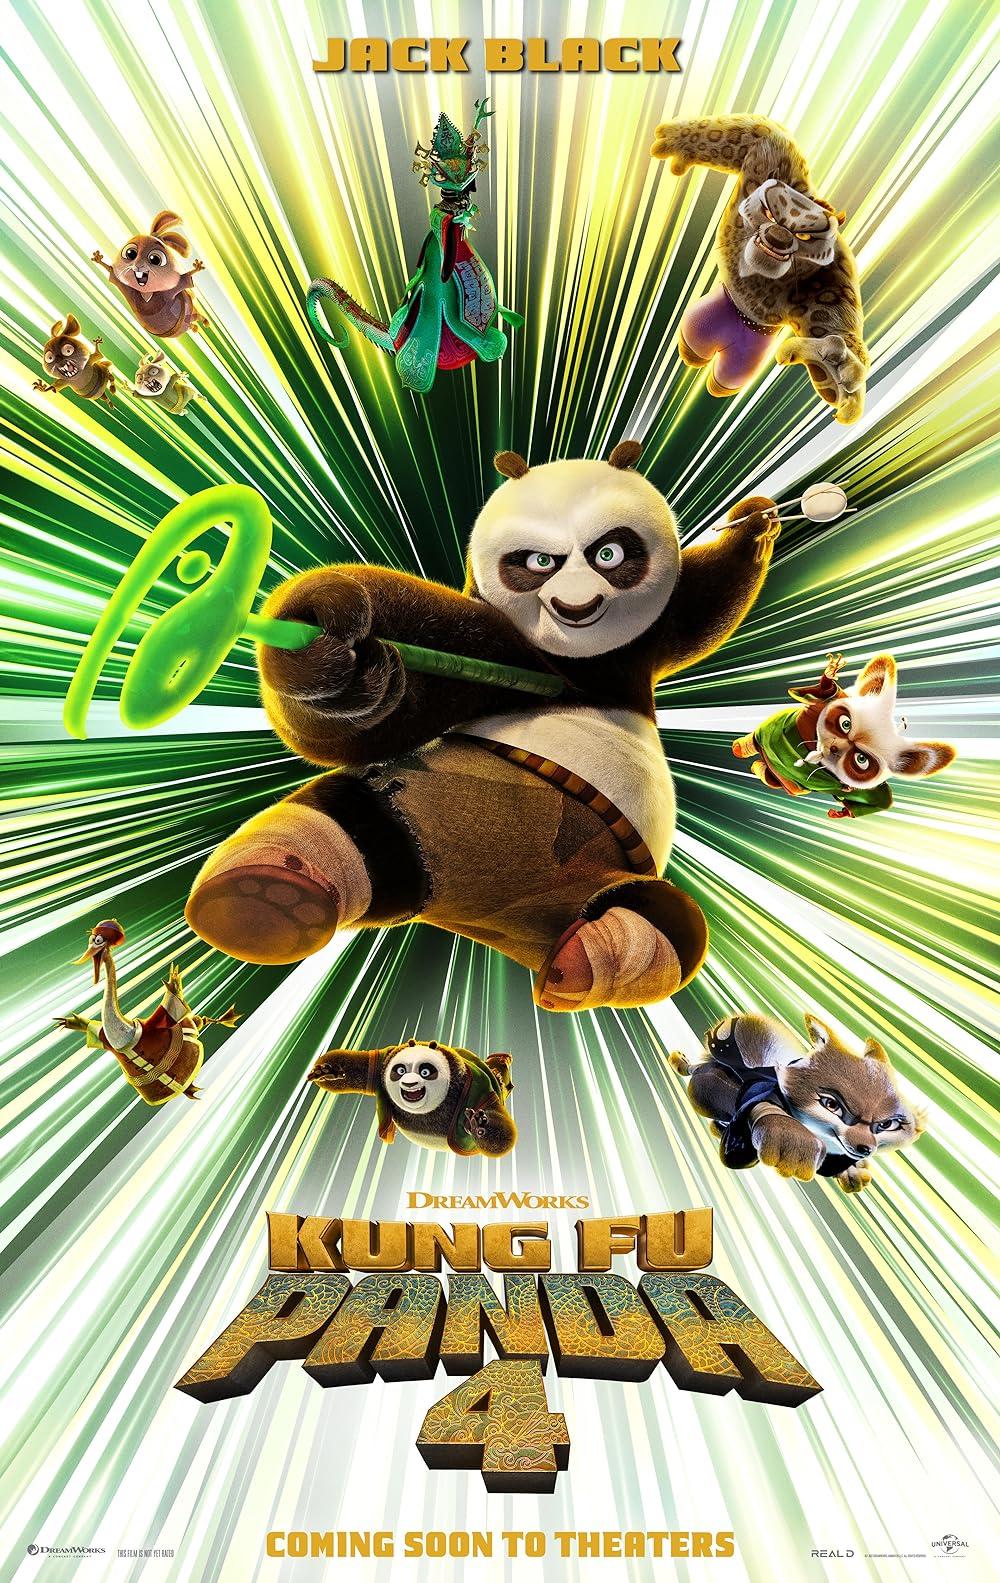 Kung Fu Panda 4 (March 8) - TheatreThe beloved franchise returns with 